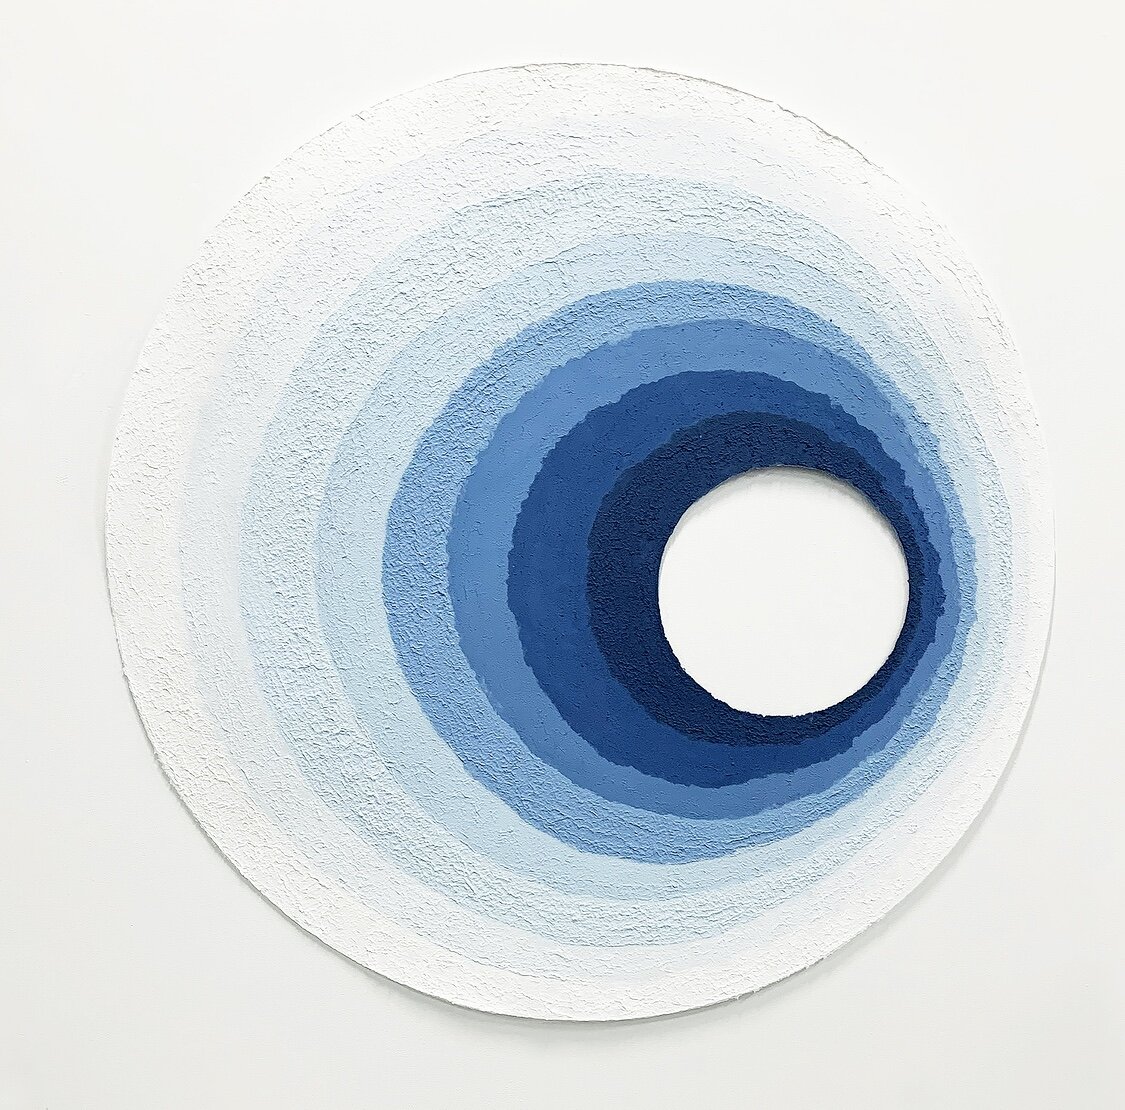    Softest hard&nbsp; #3  , 2020.   Hand-made paper, from indigo-dyed salvaged textiles (cotton bedsheets). 136cm x 136cm 